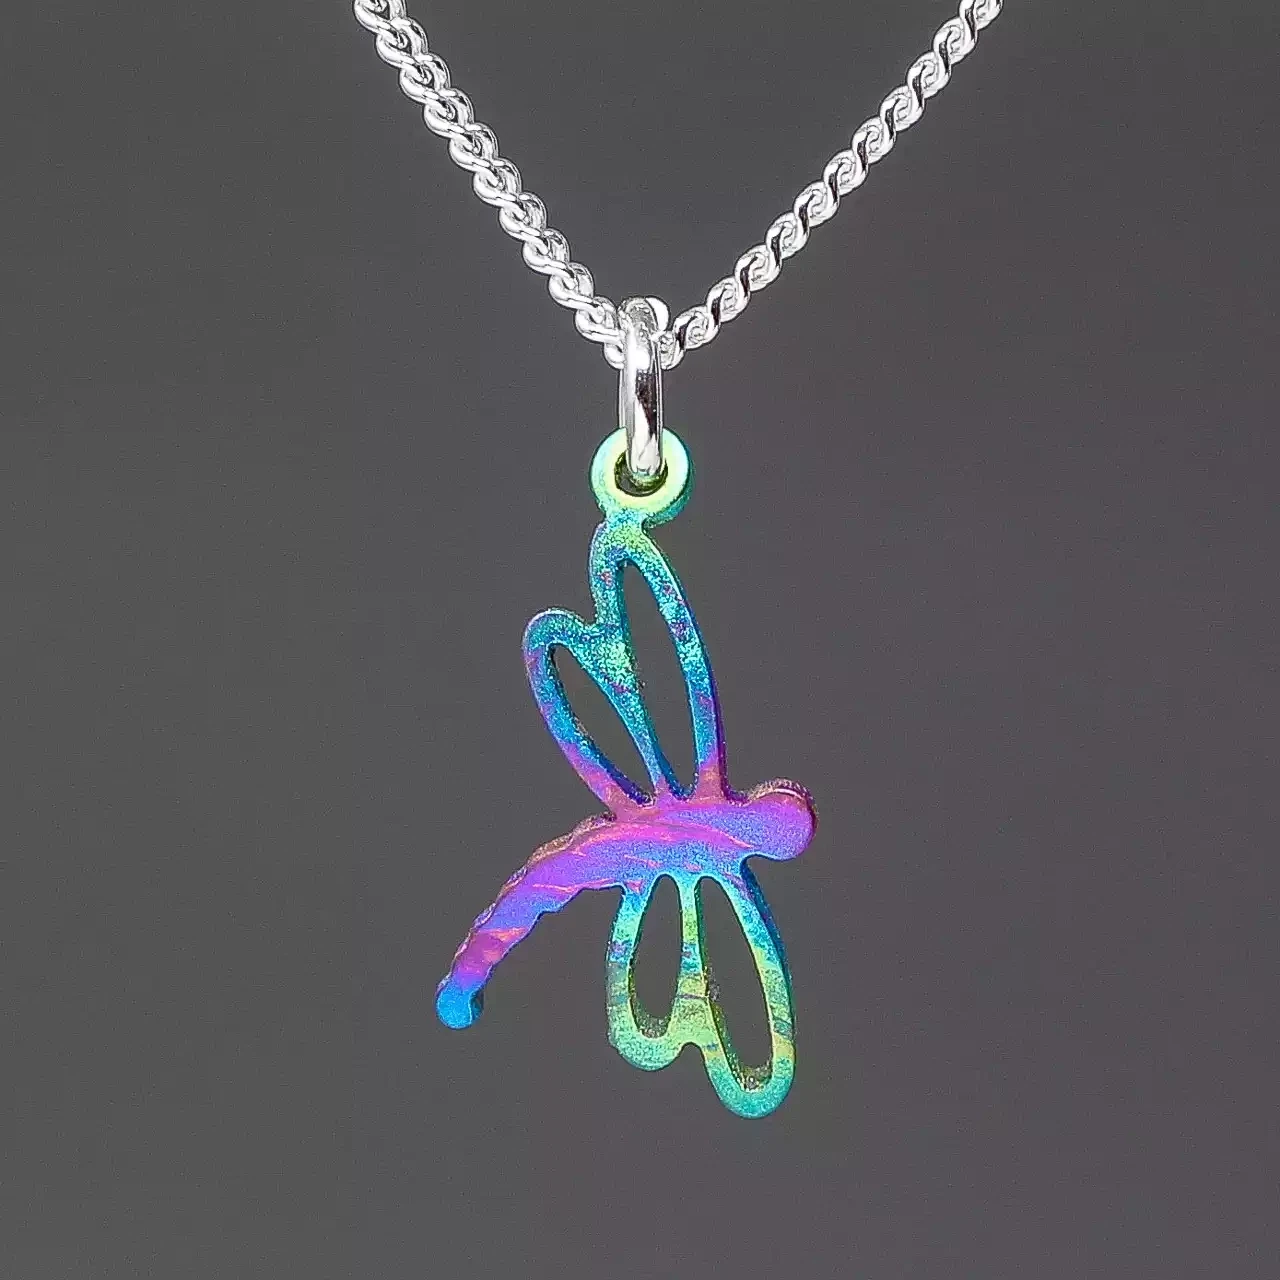 Titanium Dragonfly Pendant - Small by Prism Design